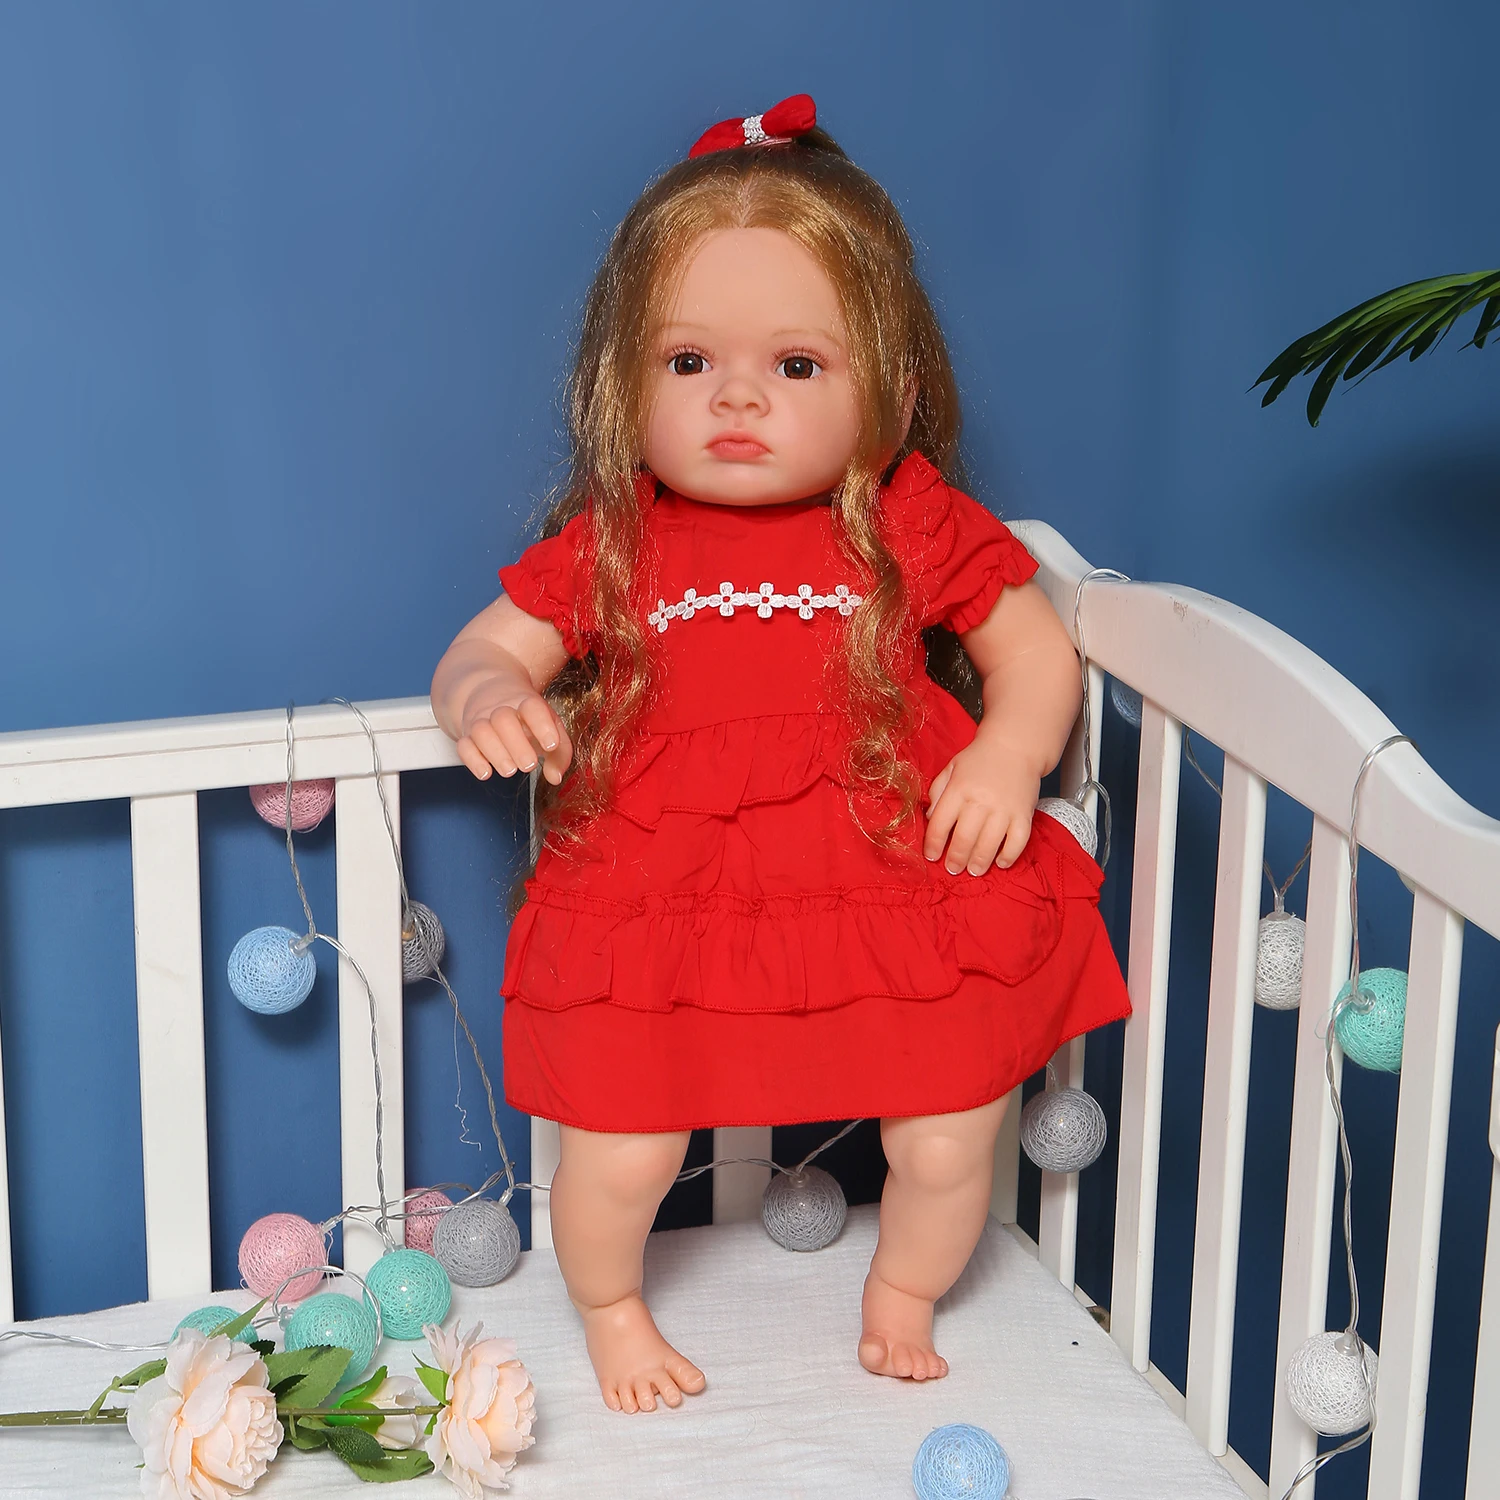 

60cm 24 Inches Tutti Finished Doll Reborn Baby Dolls Handmade Lifelike Root Hair New Christmas Gift For Girls